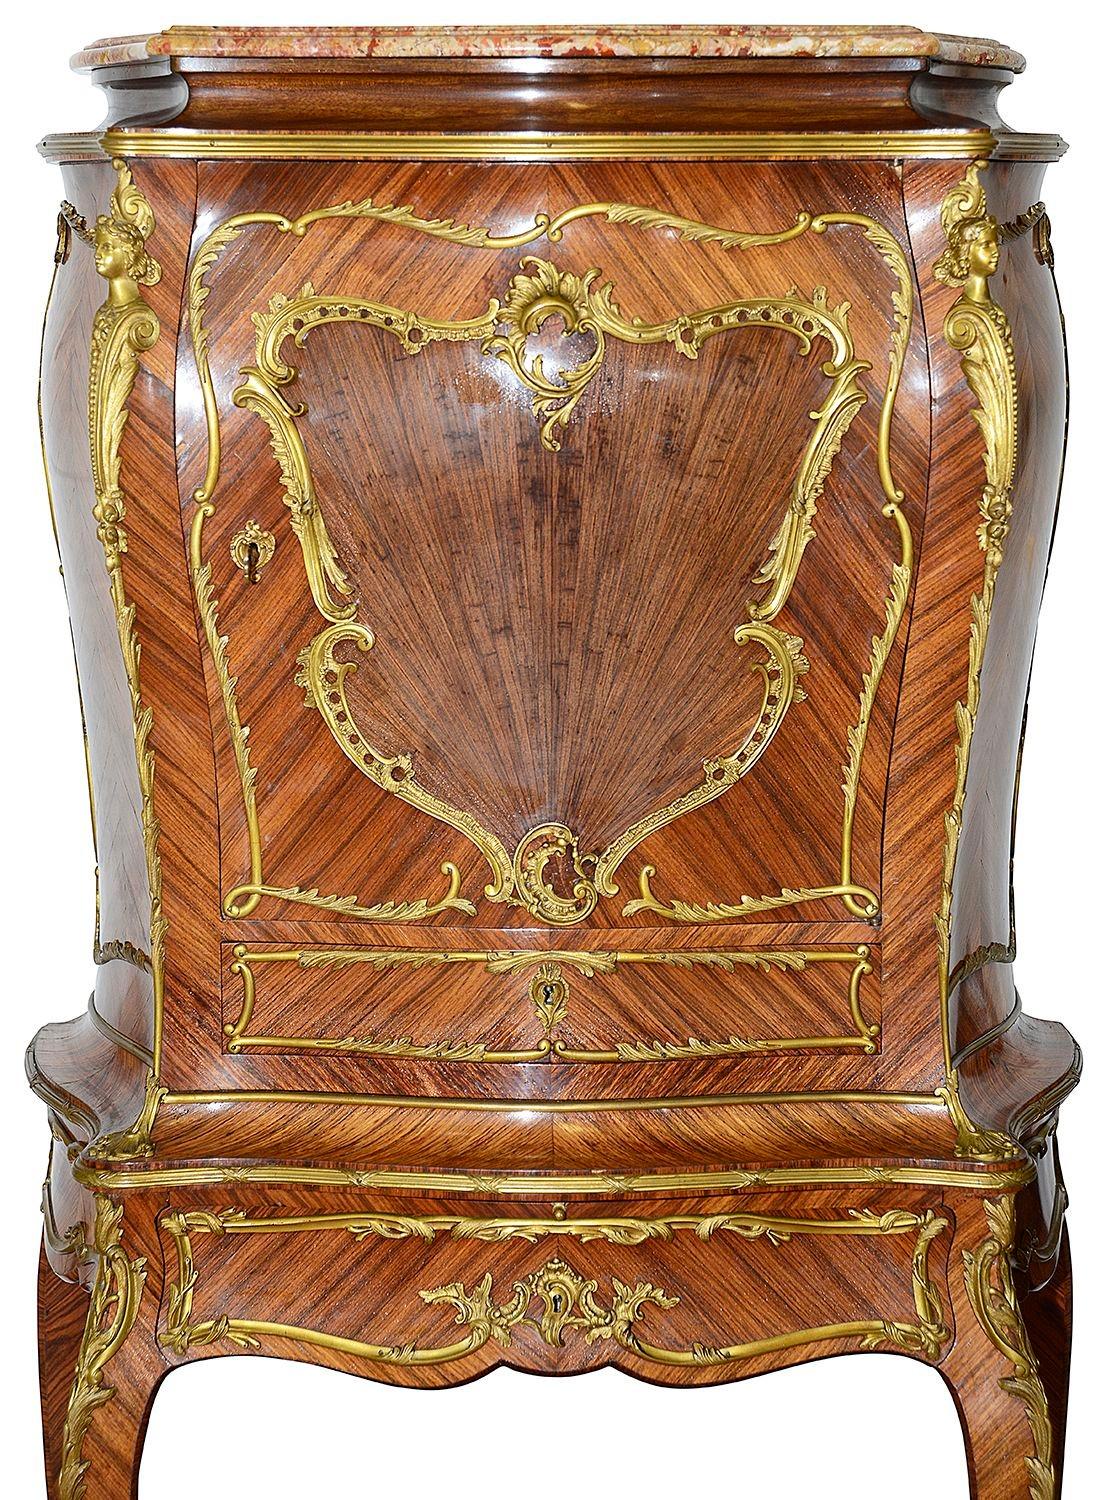 A fine quality late 19th Century French Kingwood Bombe shaped Secretaire Abbatant, having the original Rouge serpentine marble top, wonderful gilded ormolu mounts. The fall opening to reveal a compartmented interior, a single drawer beneath and 